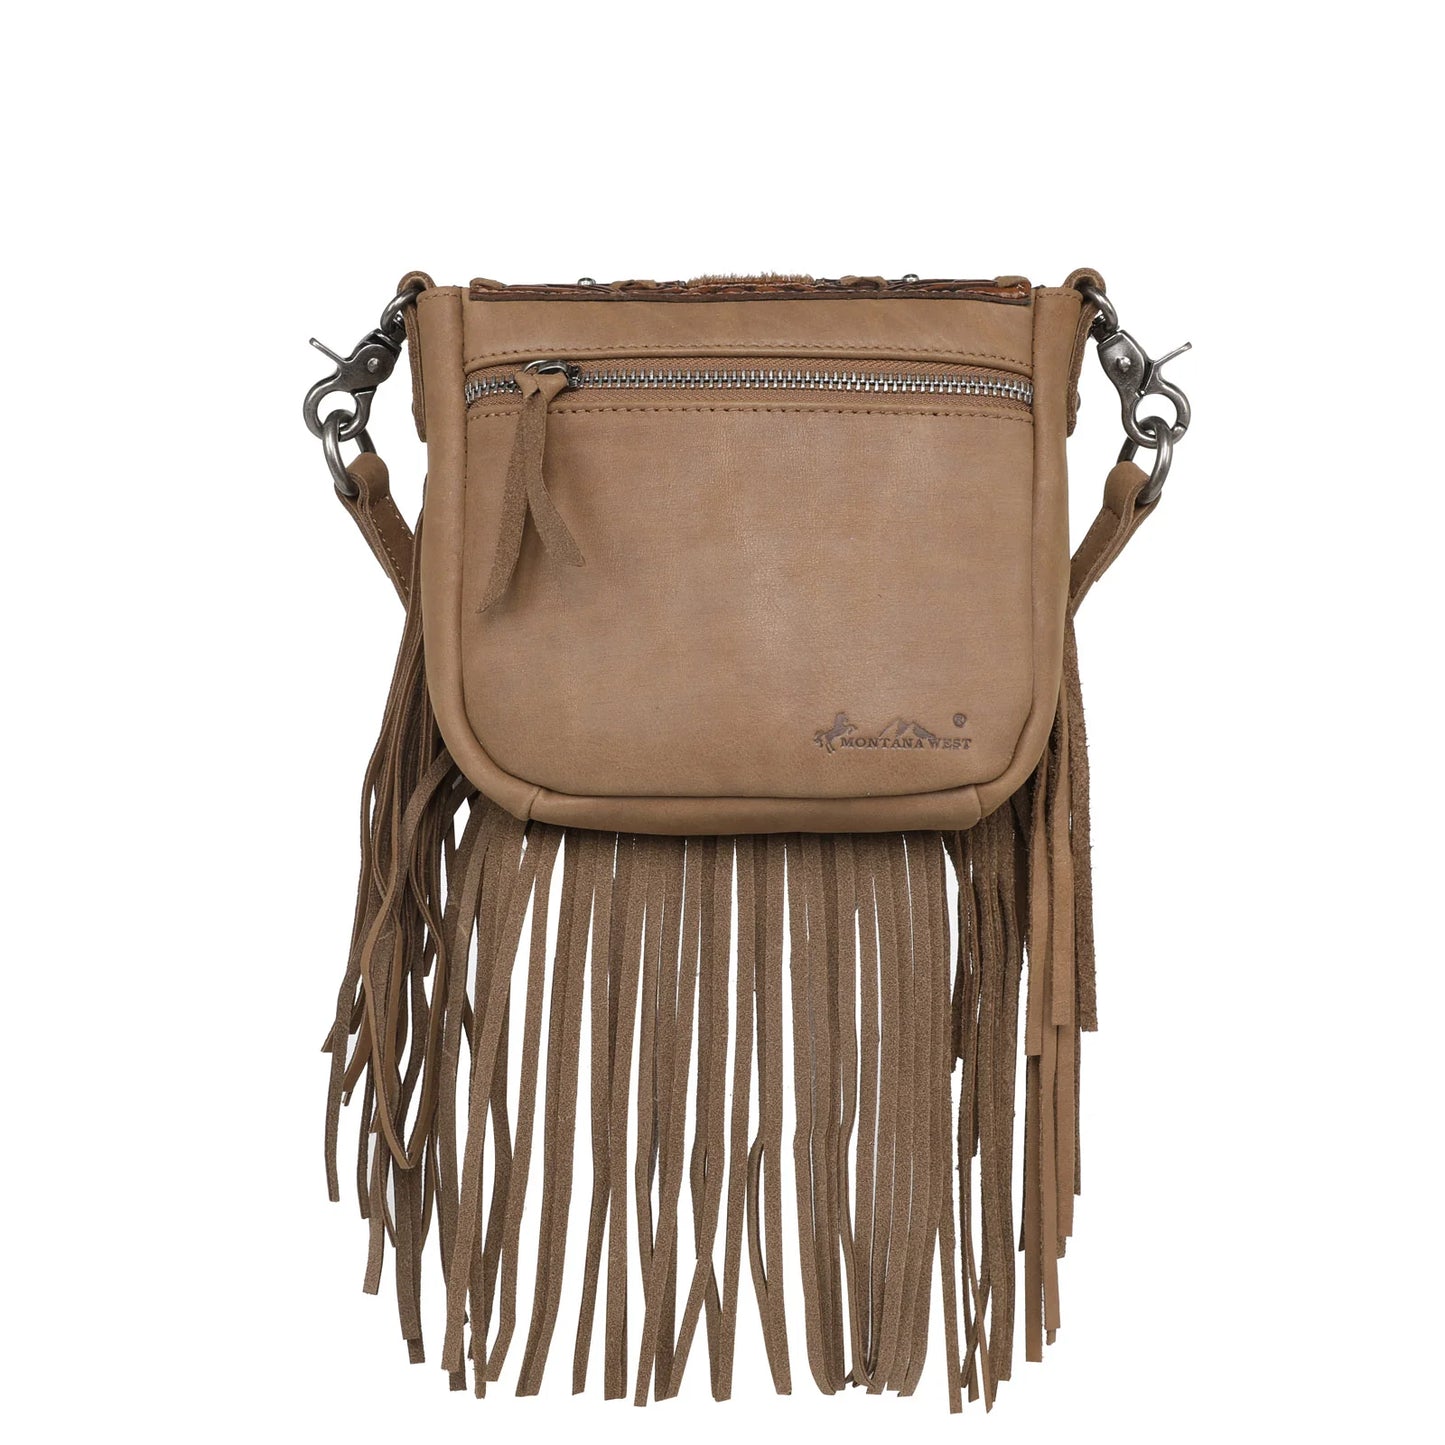 RLCL168BR - Montana West Genuine Leather Tooled Collection Fringe Crossbody